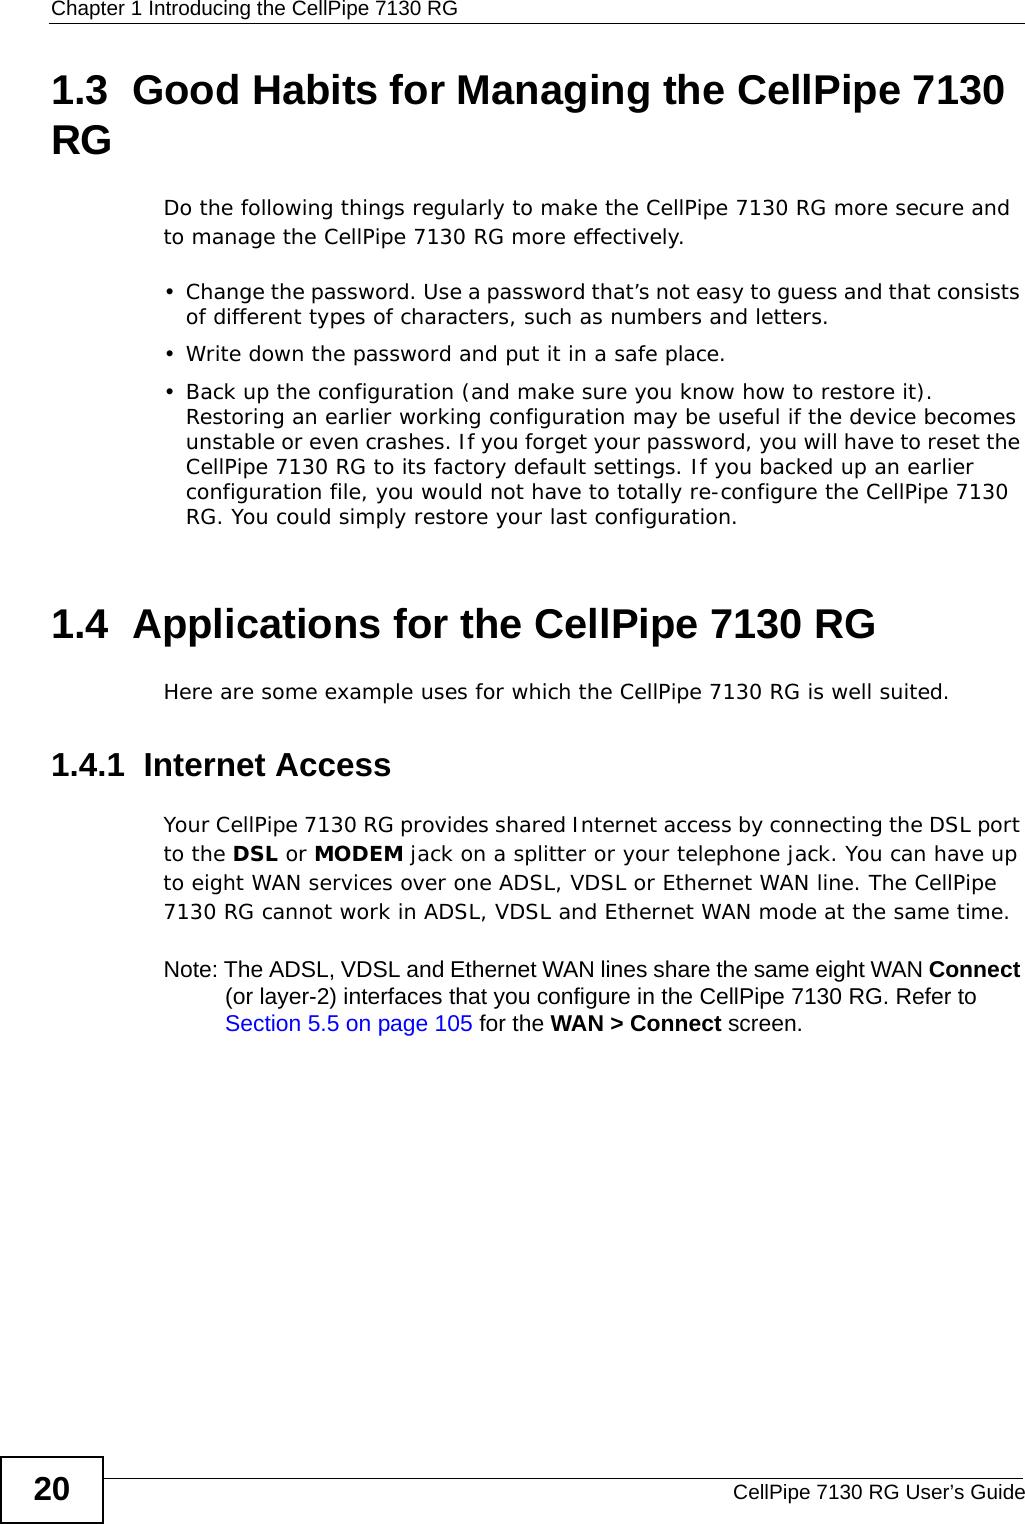 Chapter 1 Introducing the CellPipe 7130 RGCellPipe 7130 RG User’s Guide201.3  Good Habits for Managing the CellPipe 7130 RGDo the following things regularly to make the CellPipe 7130 RG more secure and to manage the CellPipe 7130 RG more effectively.• Change the password. Use a password that’s not easy to guess and that consists of different types of characters, such as numbers and letters.• Write down the password and put it in a safe place.• Back up the configuration (and make sure you know how to restore it). Restoring an earlier working configuration may be useful if the device becomes unstable or even crashes. If you forget your password, you will have to reset the CellPipe 7130 RG to its factory default settings. If you backed up an earlier configuration file, you would not have to totally re-configure the CellPipe 7130 RG. You could simply restore your last configuration.1.4  Applications for the CellPipe 7130 RG Here are some example uses for which the CellPipe 7130 RG is well suited.1.4.1  Internet AccessYour CellPipe 7130 RG provides shared Internet access by connecting the DSL port to the DSL or MODEM jack on a splitter or your telephone jack. You can have up to eight WAN services over one ADSL, VDSL or Ethernet WAN line. The CellPipe 7130 RG cannot work in ADSL, VDSL and Ethernet WAN mode at the same time.Note: The ADSL, VDSL and Ethernet WAN lines share the same eight WAN Connect (or layer-2) interfaces that you configure in the CellPipe 7130 RG. Refer to Section 5.5 on page 105 for the WAN &gt; Connect screen.